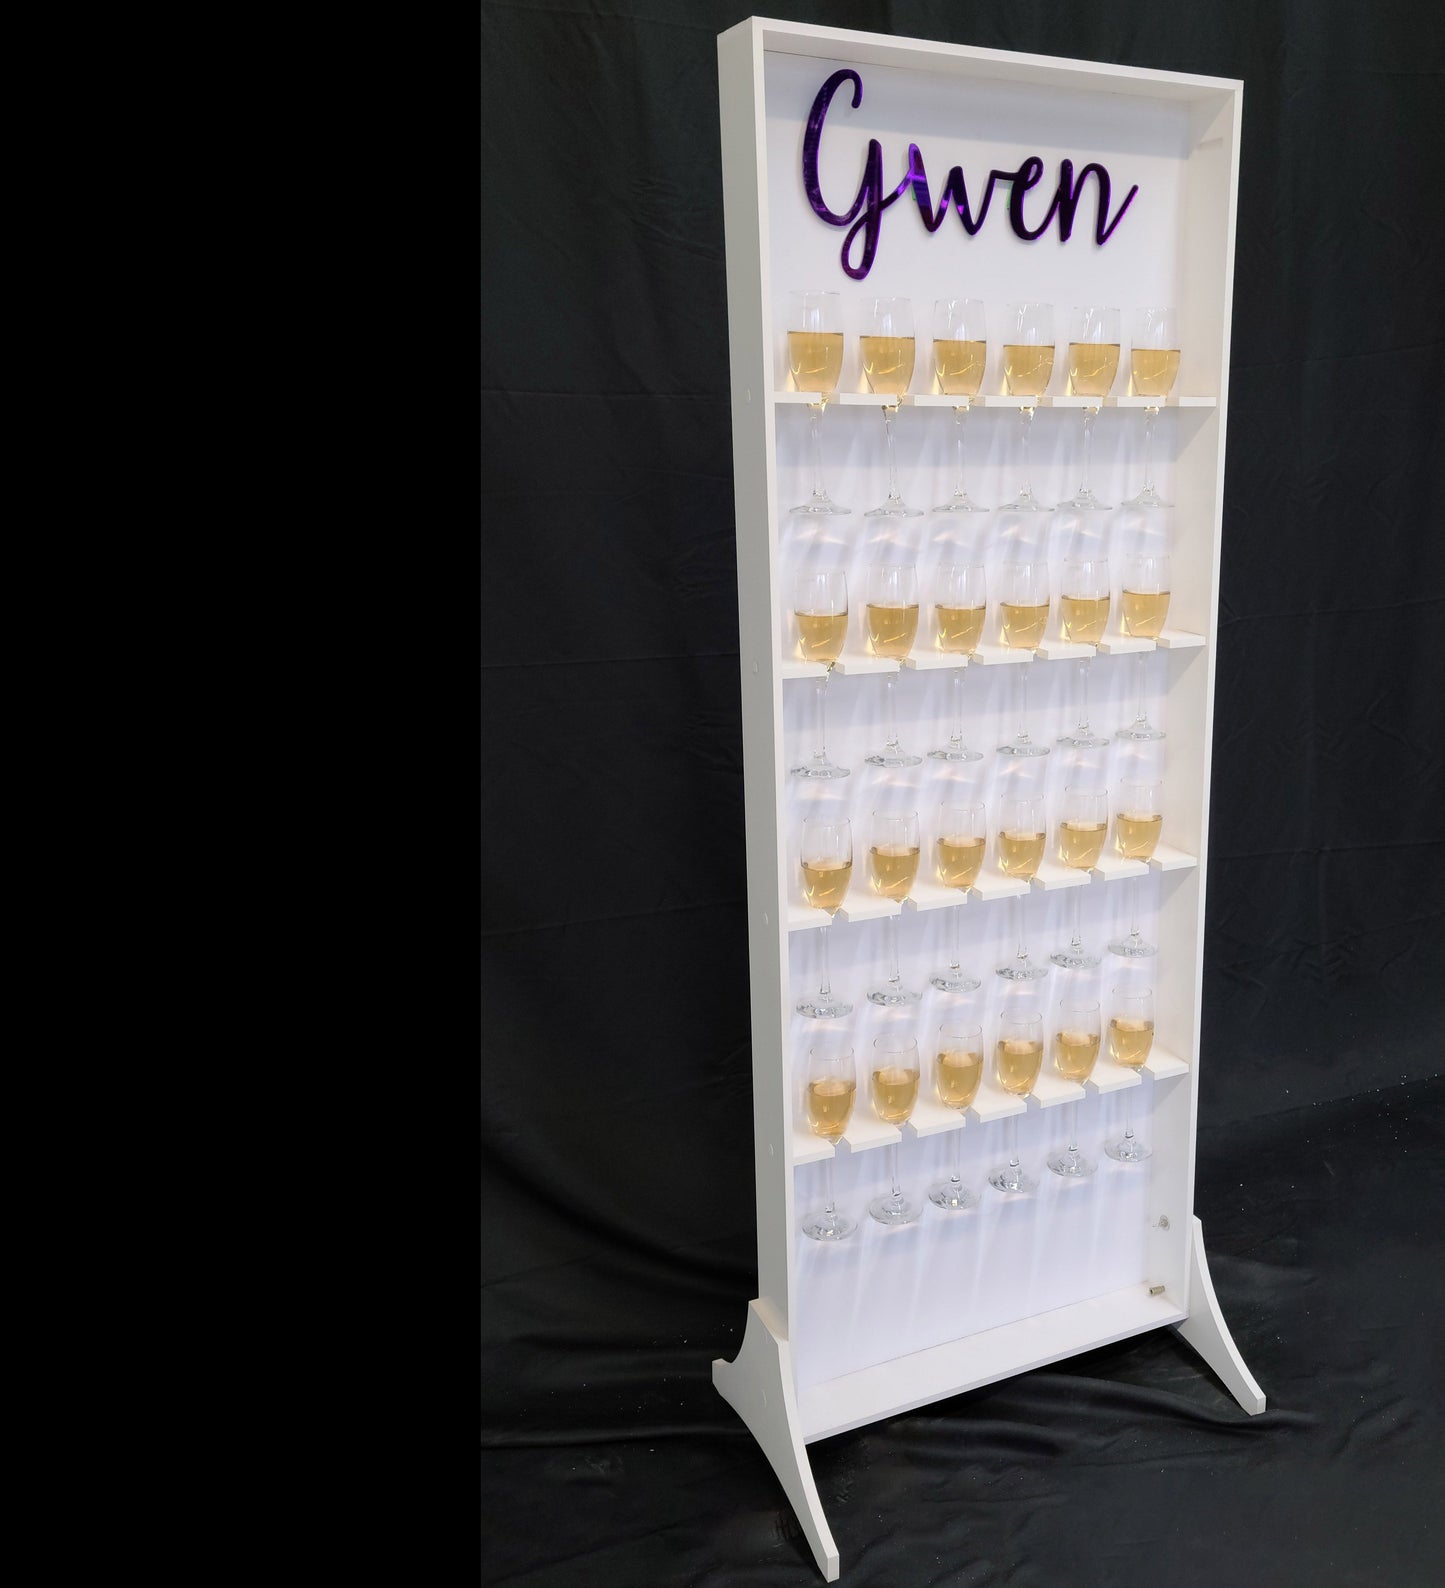 Champagne Wall, Champagne Display, Champagne Flute Holder, Drink Dispenser, Party Decor, Wedding Decor, Event Decor, Graduation Party, Corporate Event, Champagne Wall Indoor & Outdoor Use, Durable PVC Champagne Wall, Easy Assembly Champagne Wall,